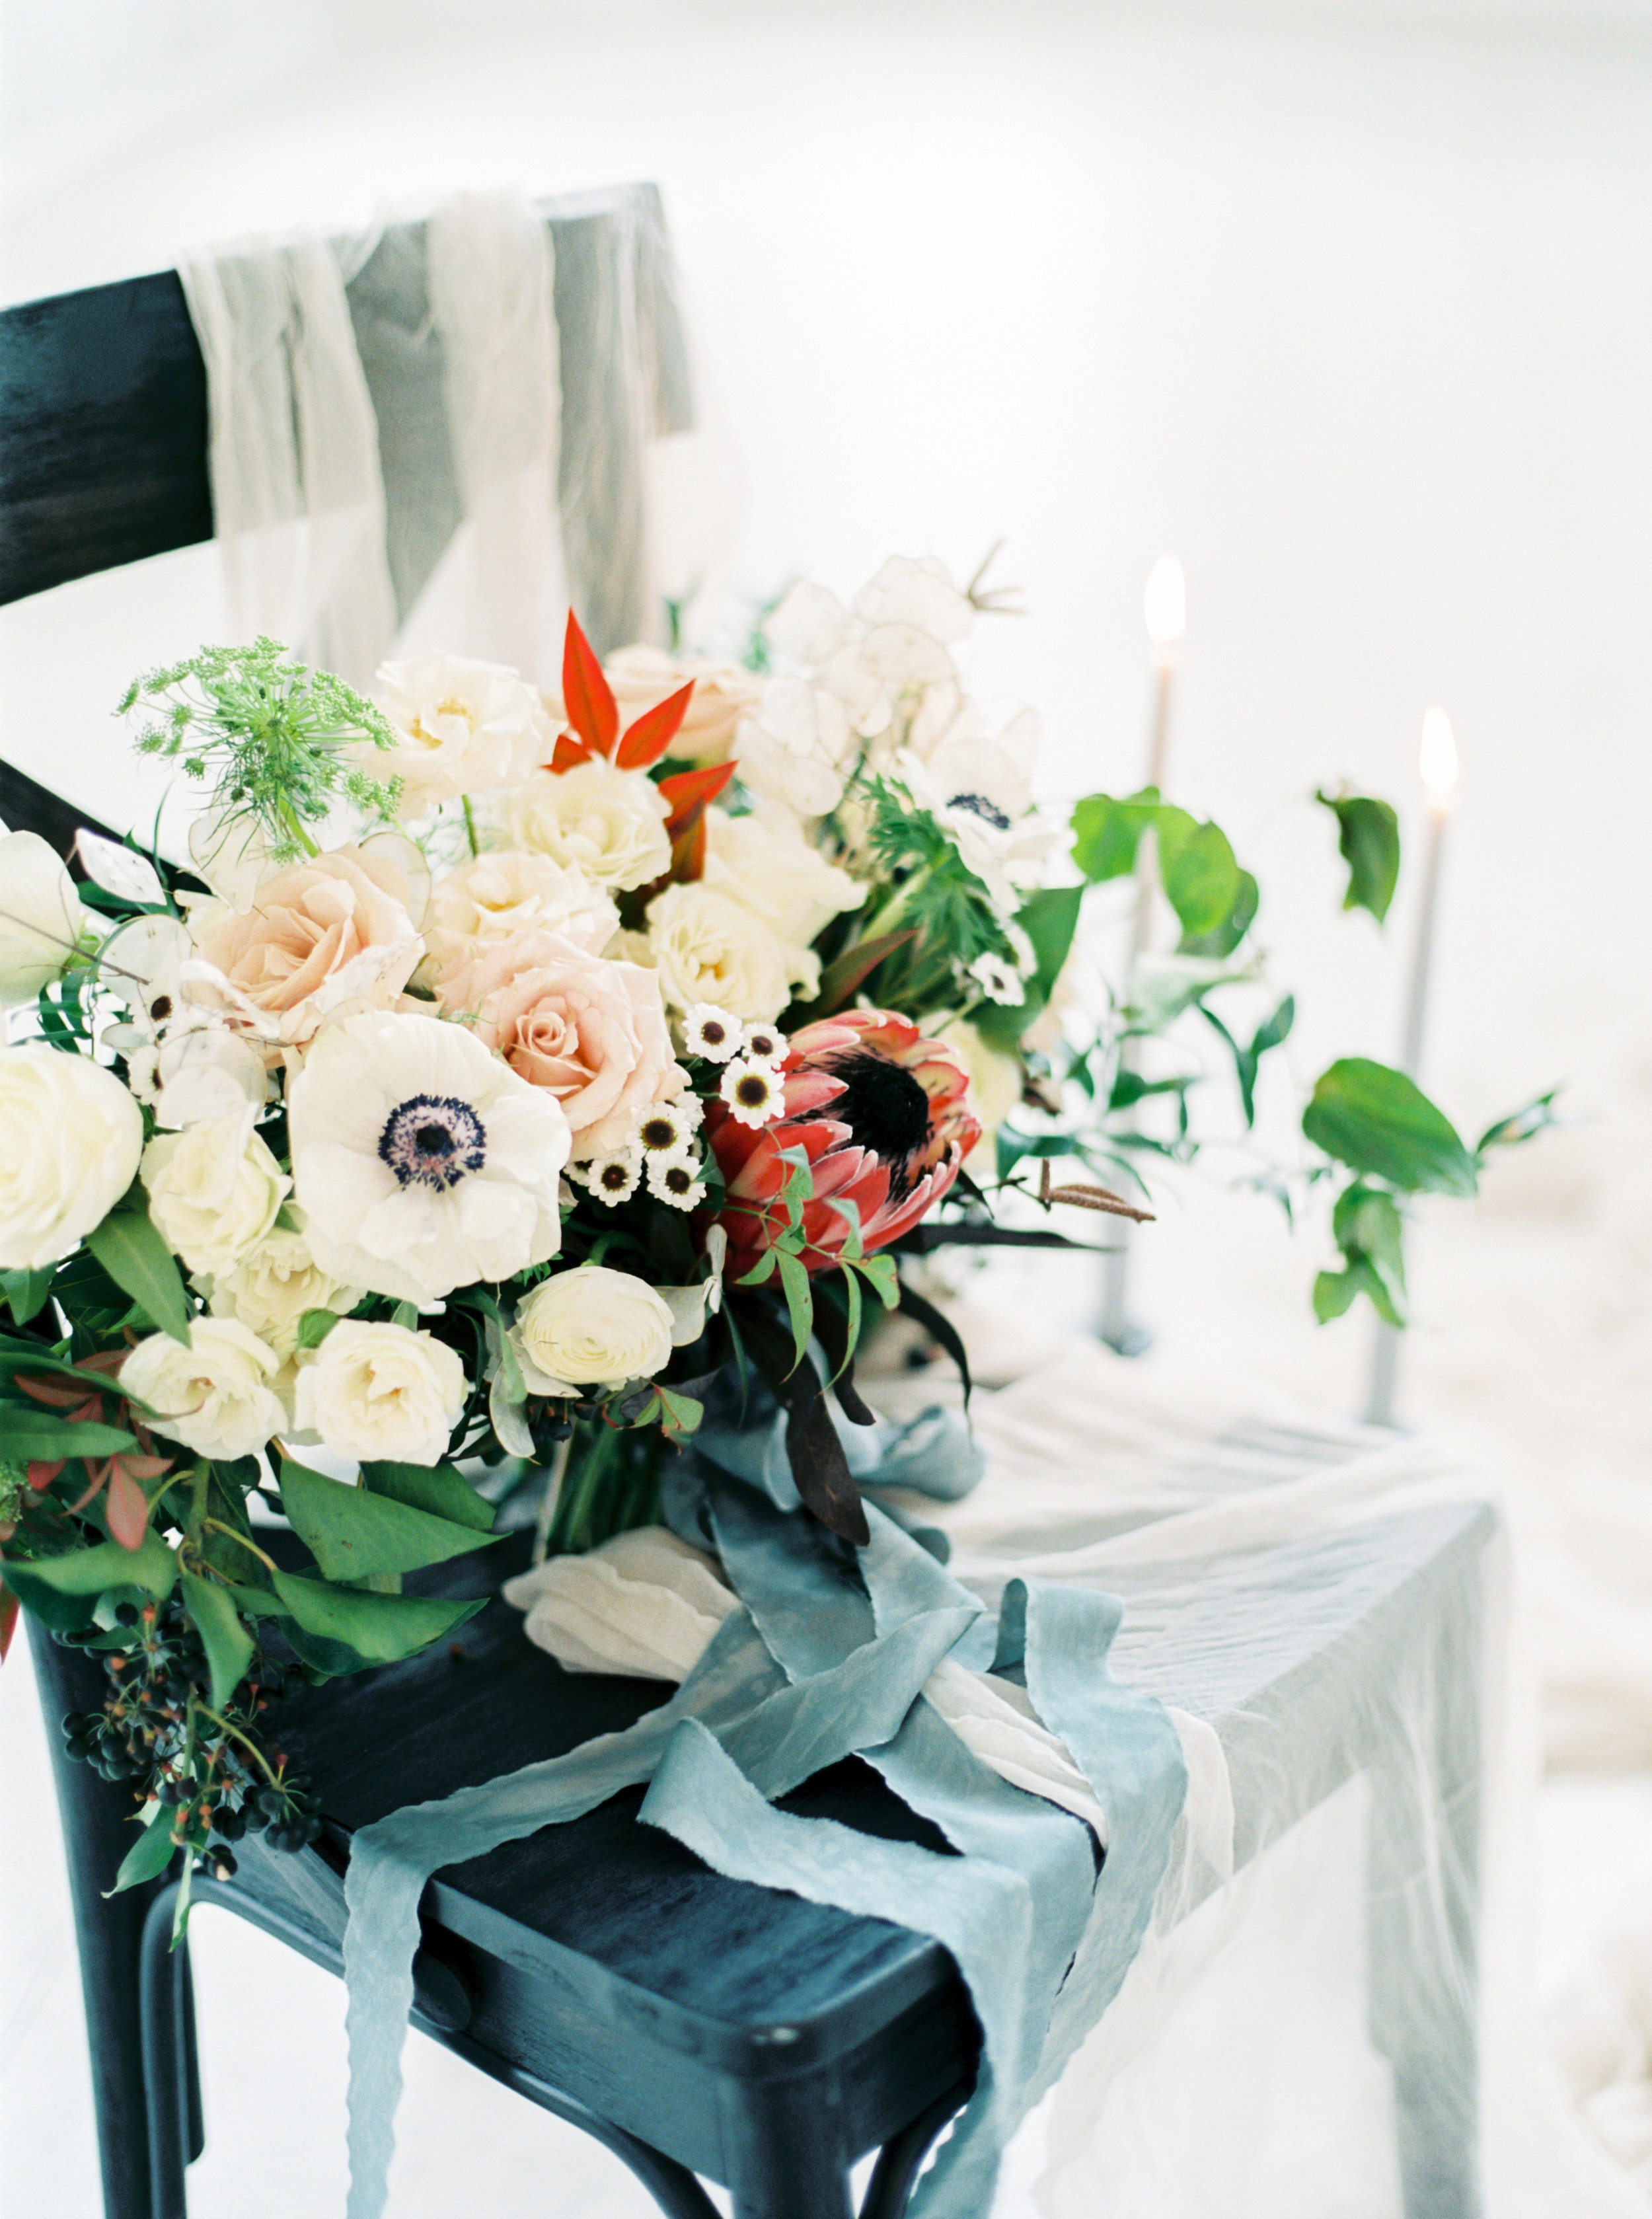 Callie Manion Photography_White Sparrow Open House_Styled Shoot_091.jpg